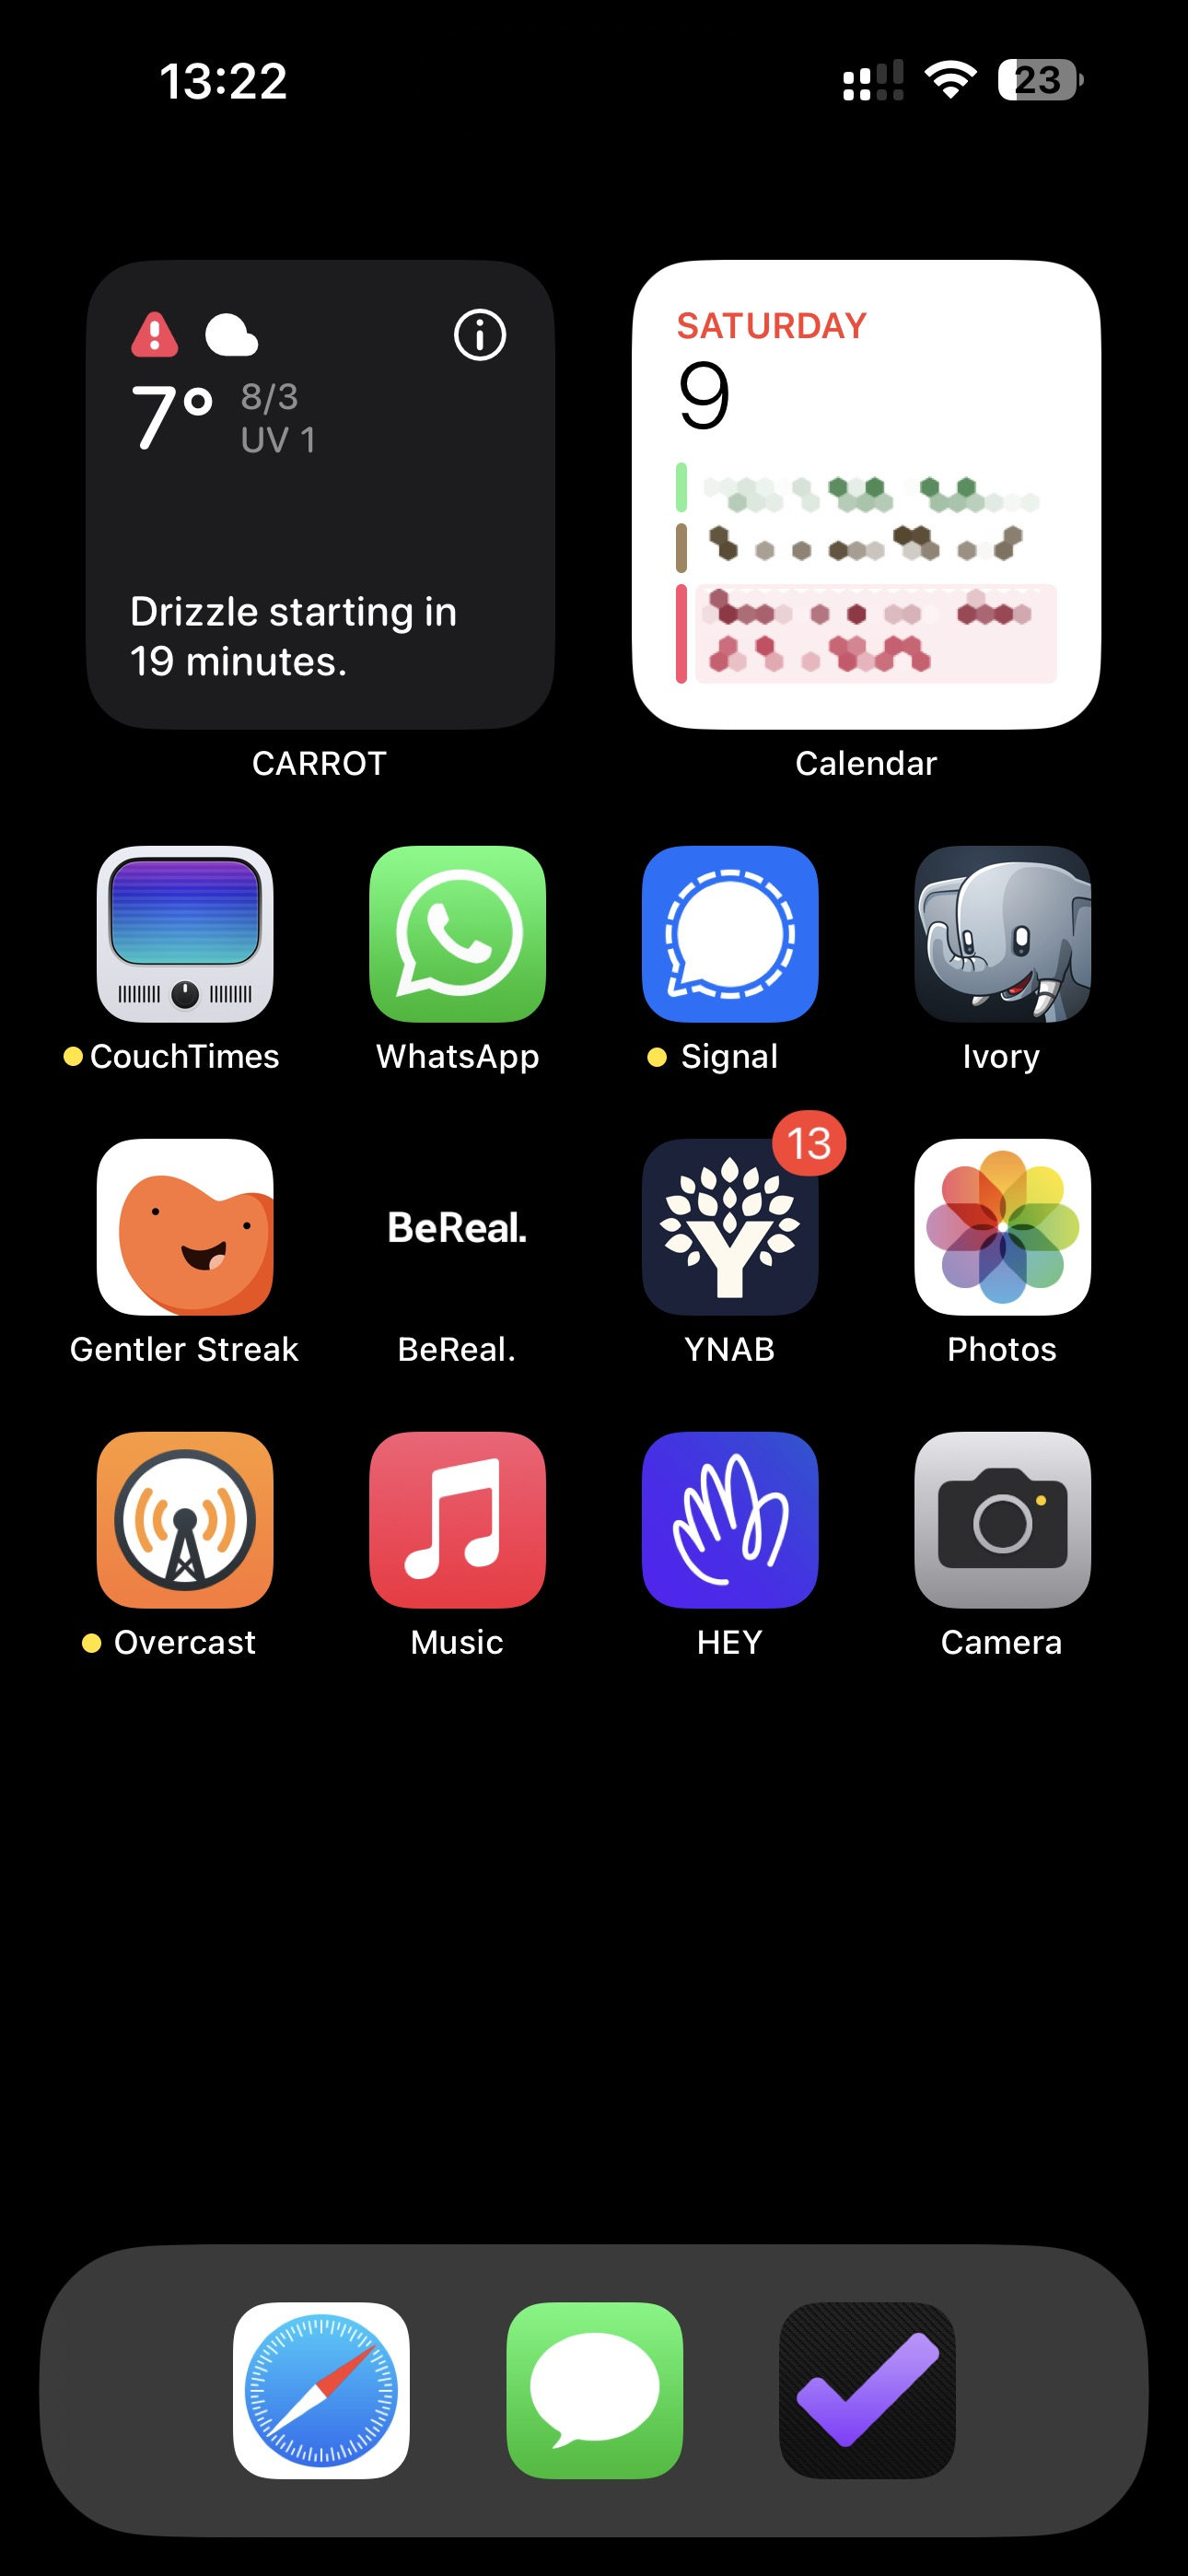 An iPhone Home Screen with a black background. At the top are two small widgets: CARROT weather and Calendar. Below that are three rows of apps: CouchTimes, WhatsApp, Signal, Ivory, Gentler Streak, BeReal, YNAB, Photos, Overcast, Music, HEY and Camera. The dock has three apps: Safari, Messages & OmniFocus 4